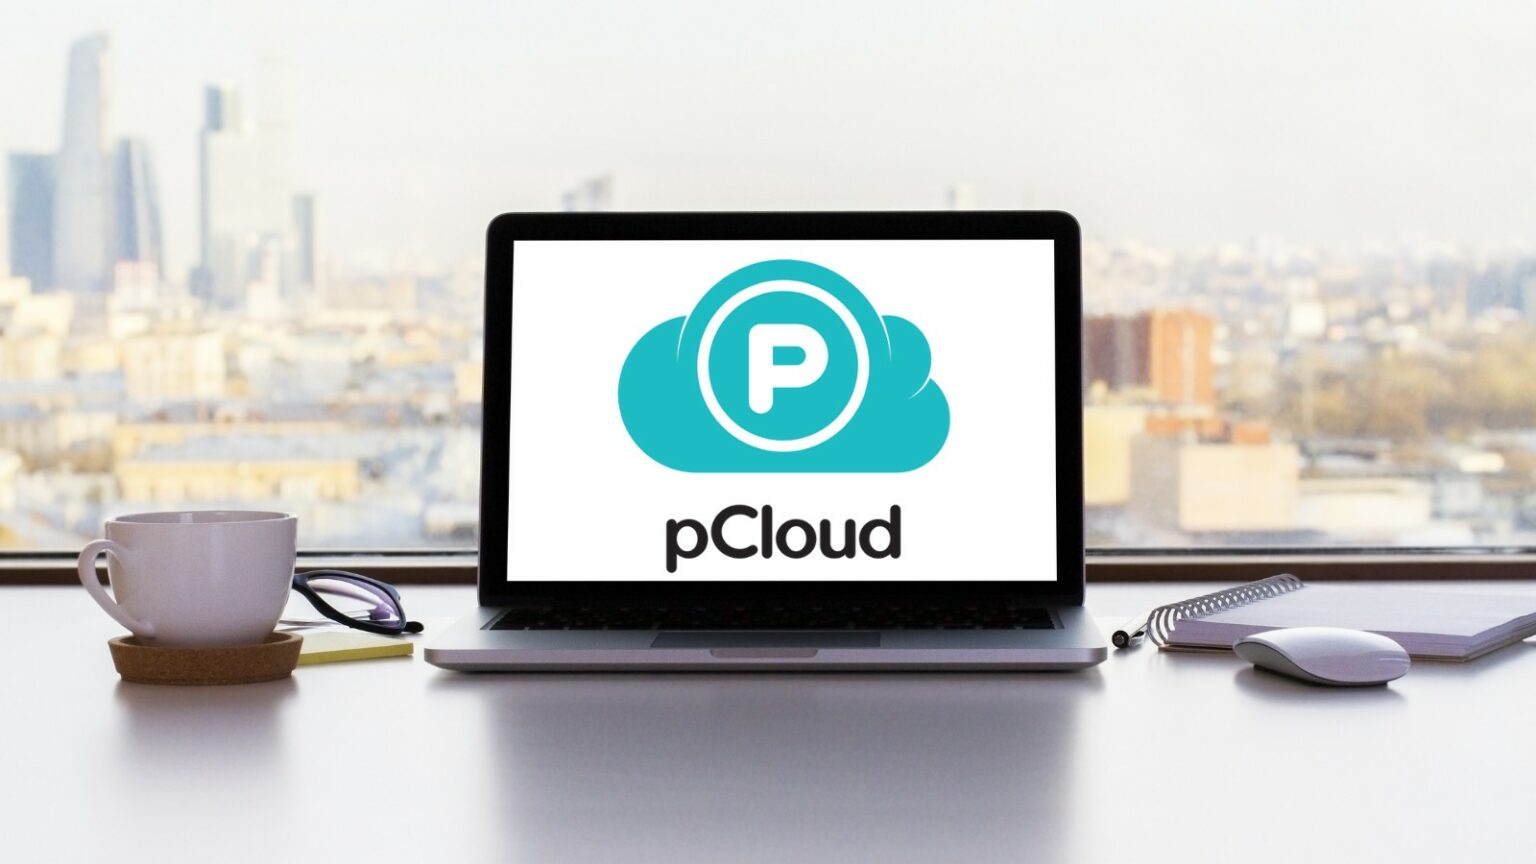 pCloud offers you a reliable, affordable and secure option for cloud storage.